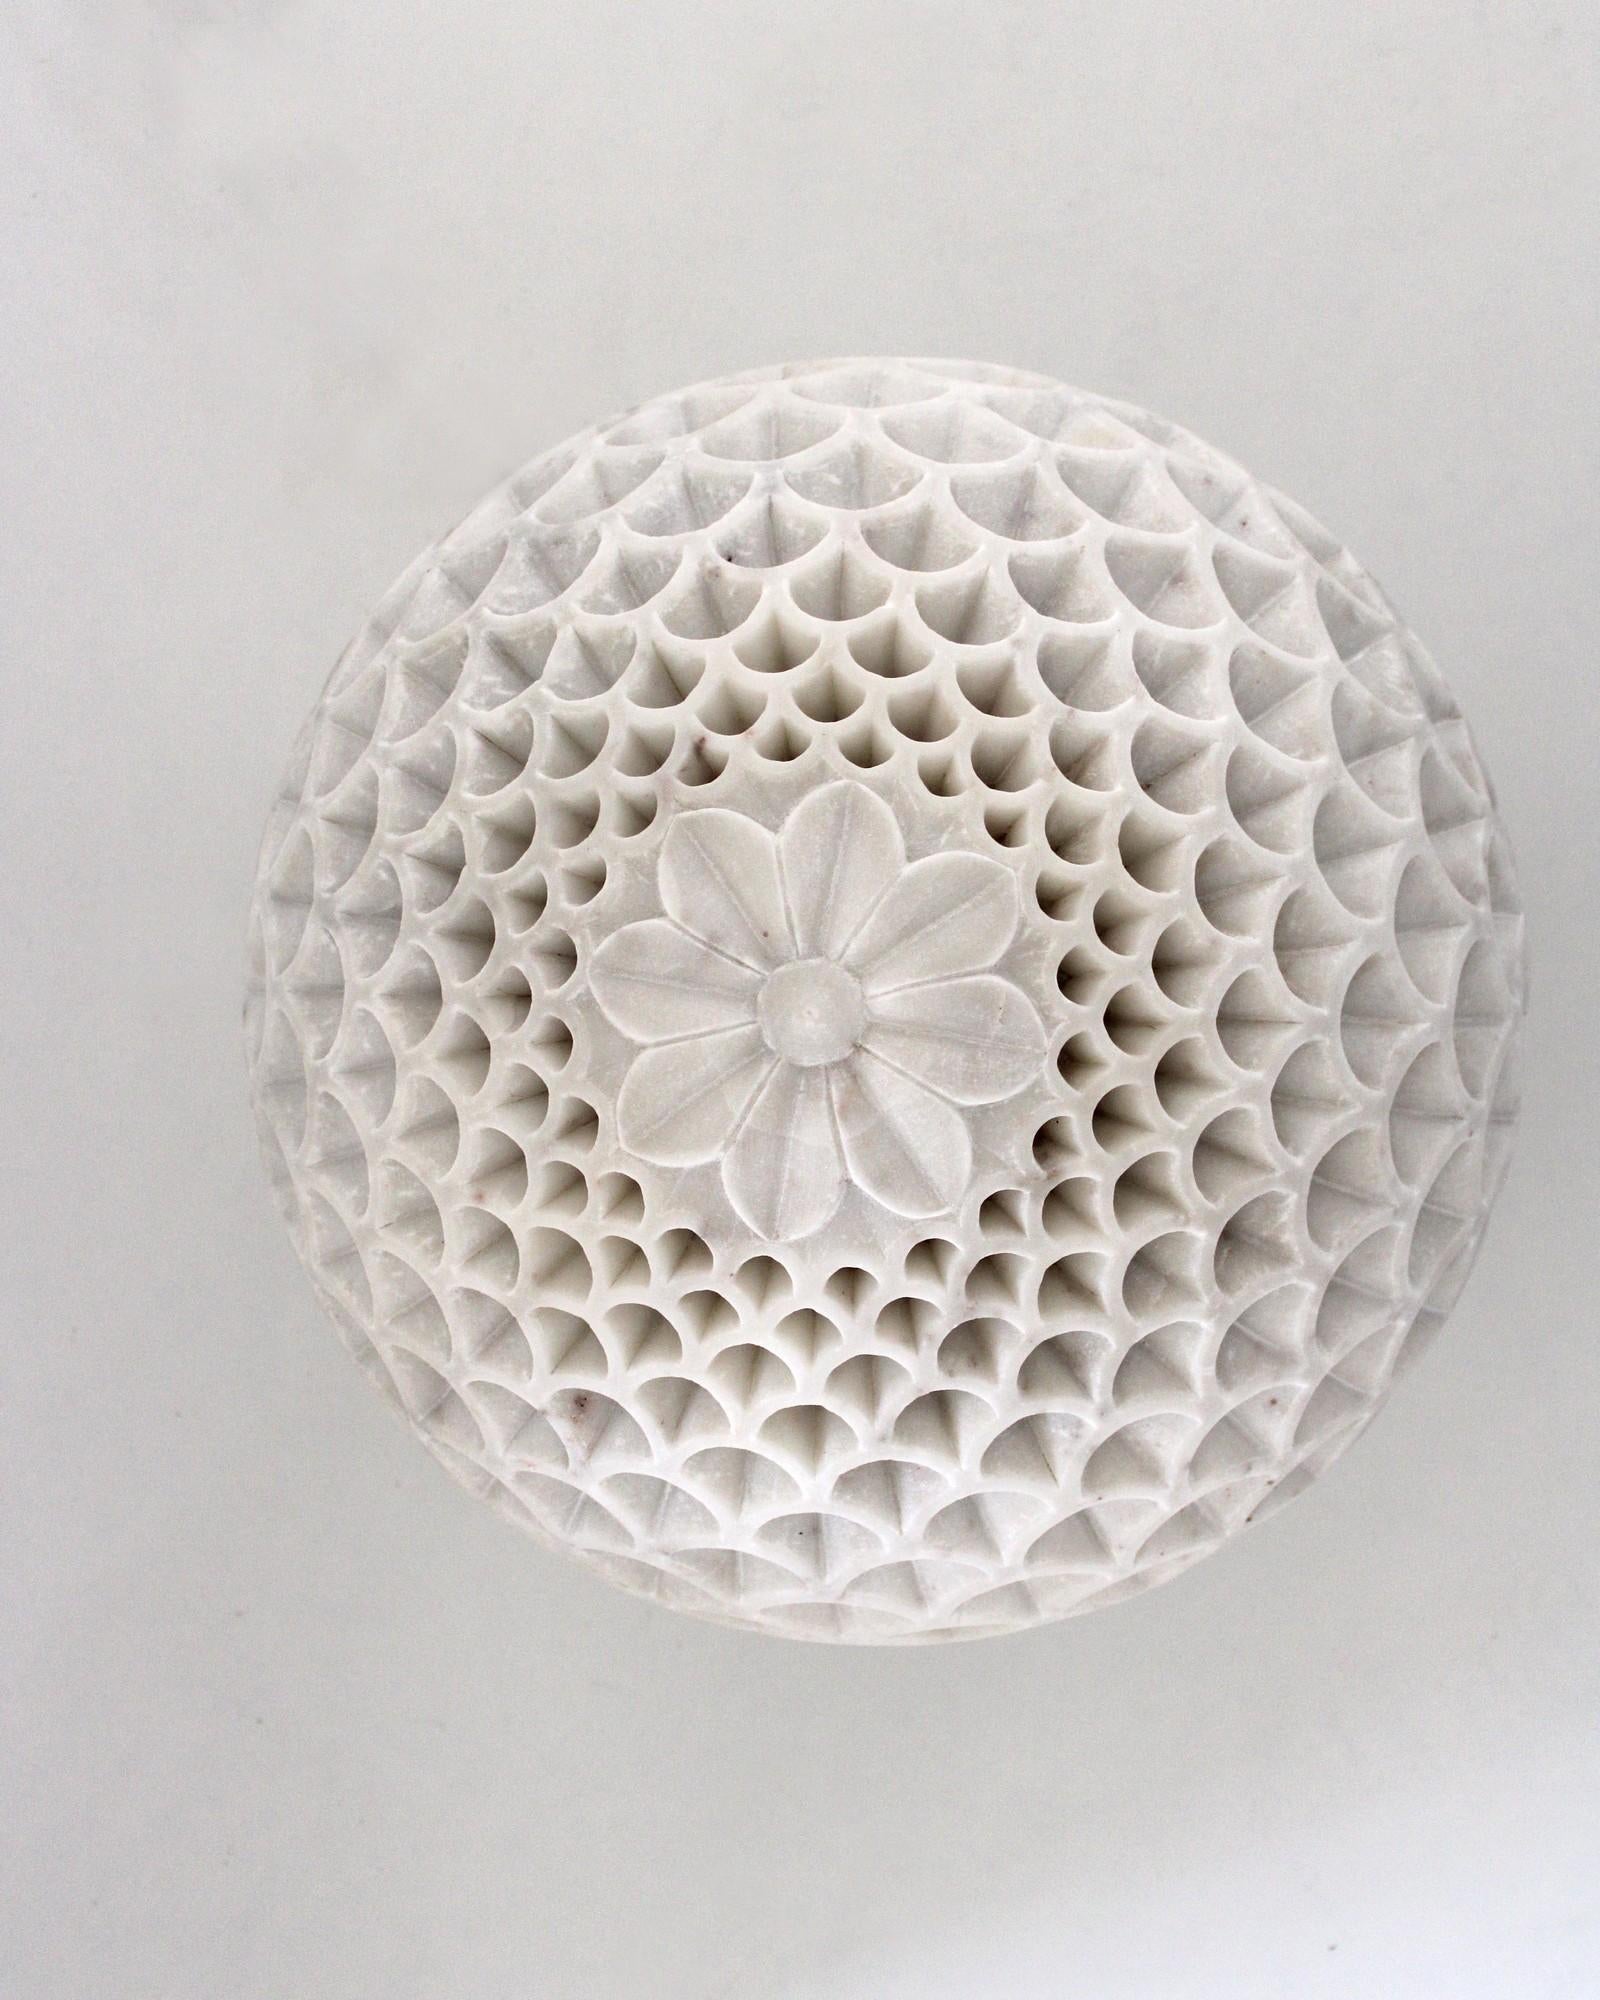 Pinecone Globe in White Marble 15